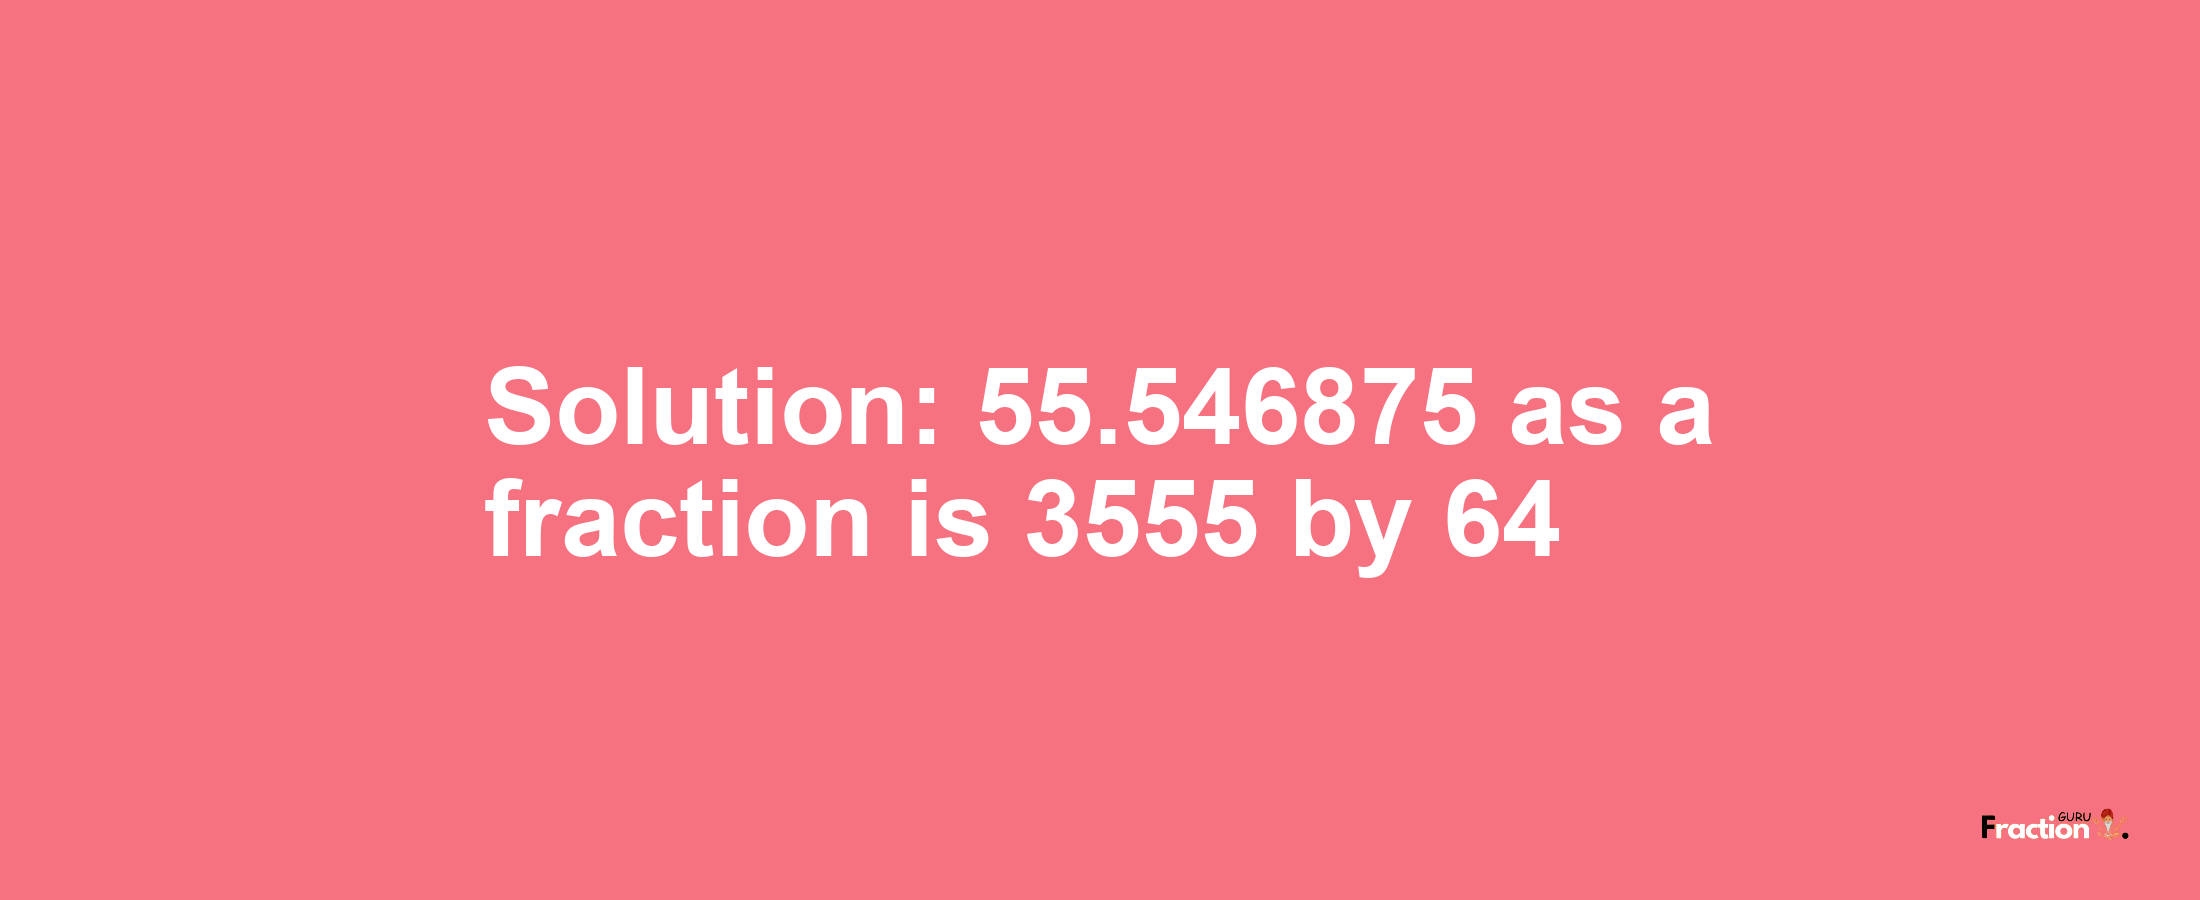 Solution:55.546875 as a fraction is 3555/64